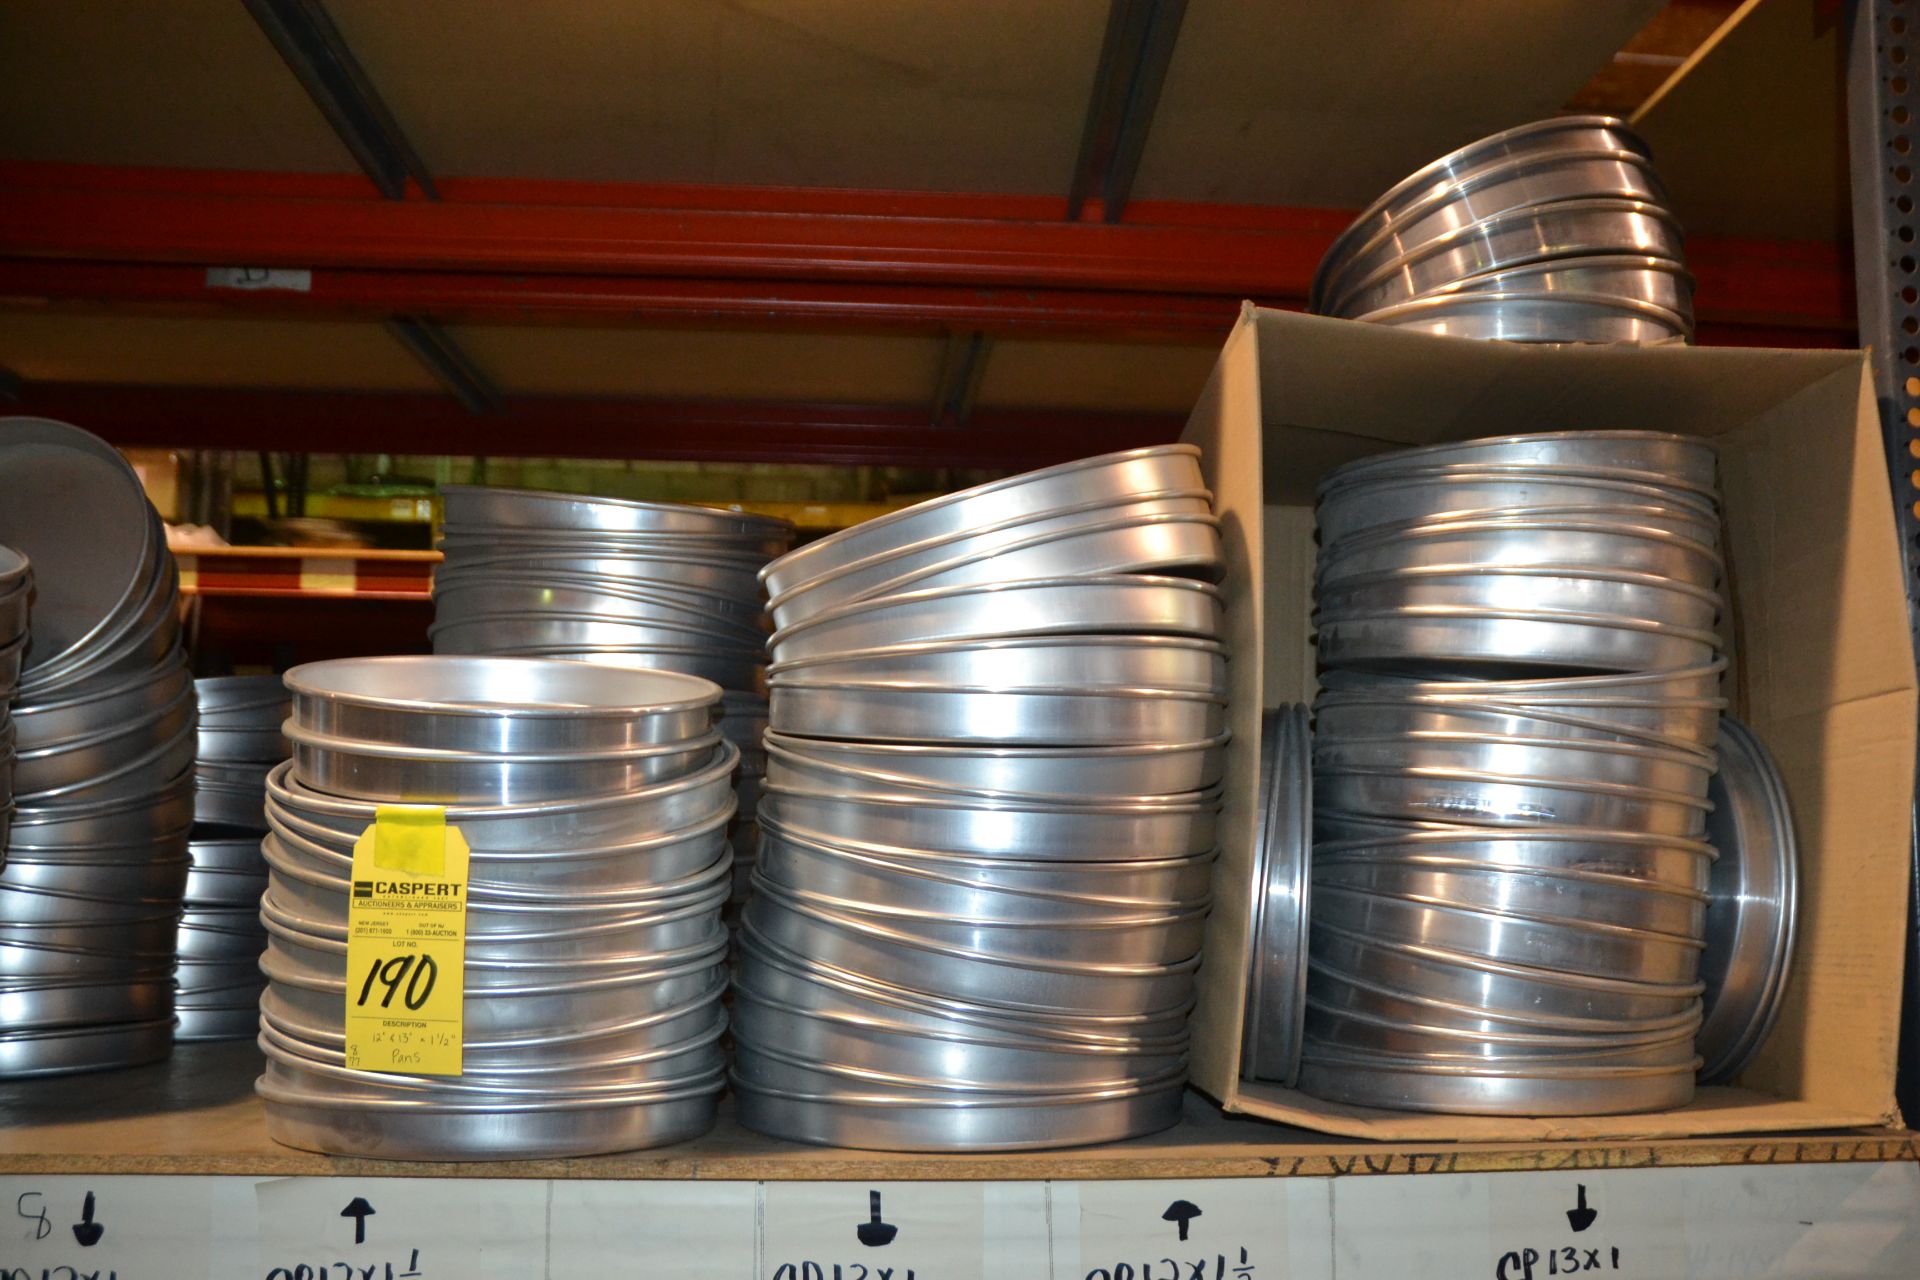 12" & 13" x 1 1/2" Deep Straight Sided Pans